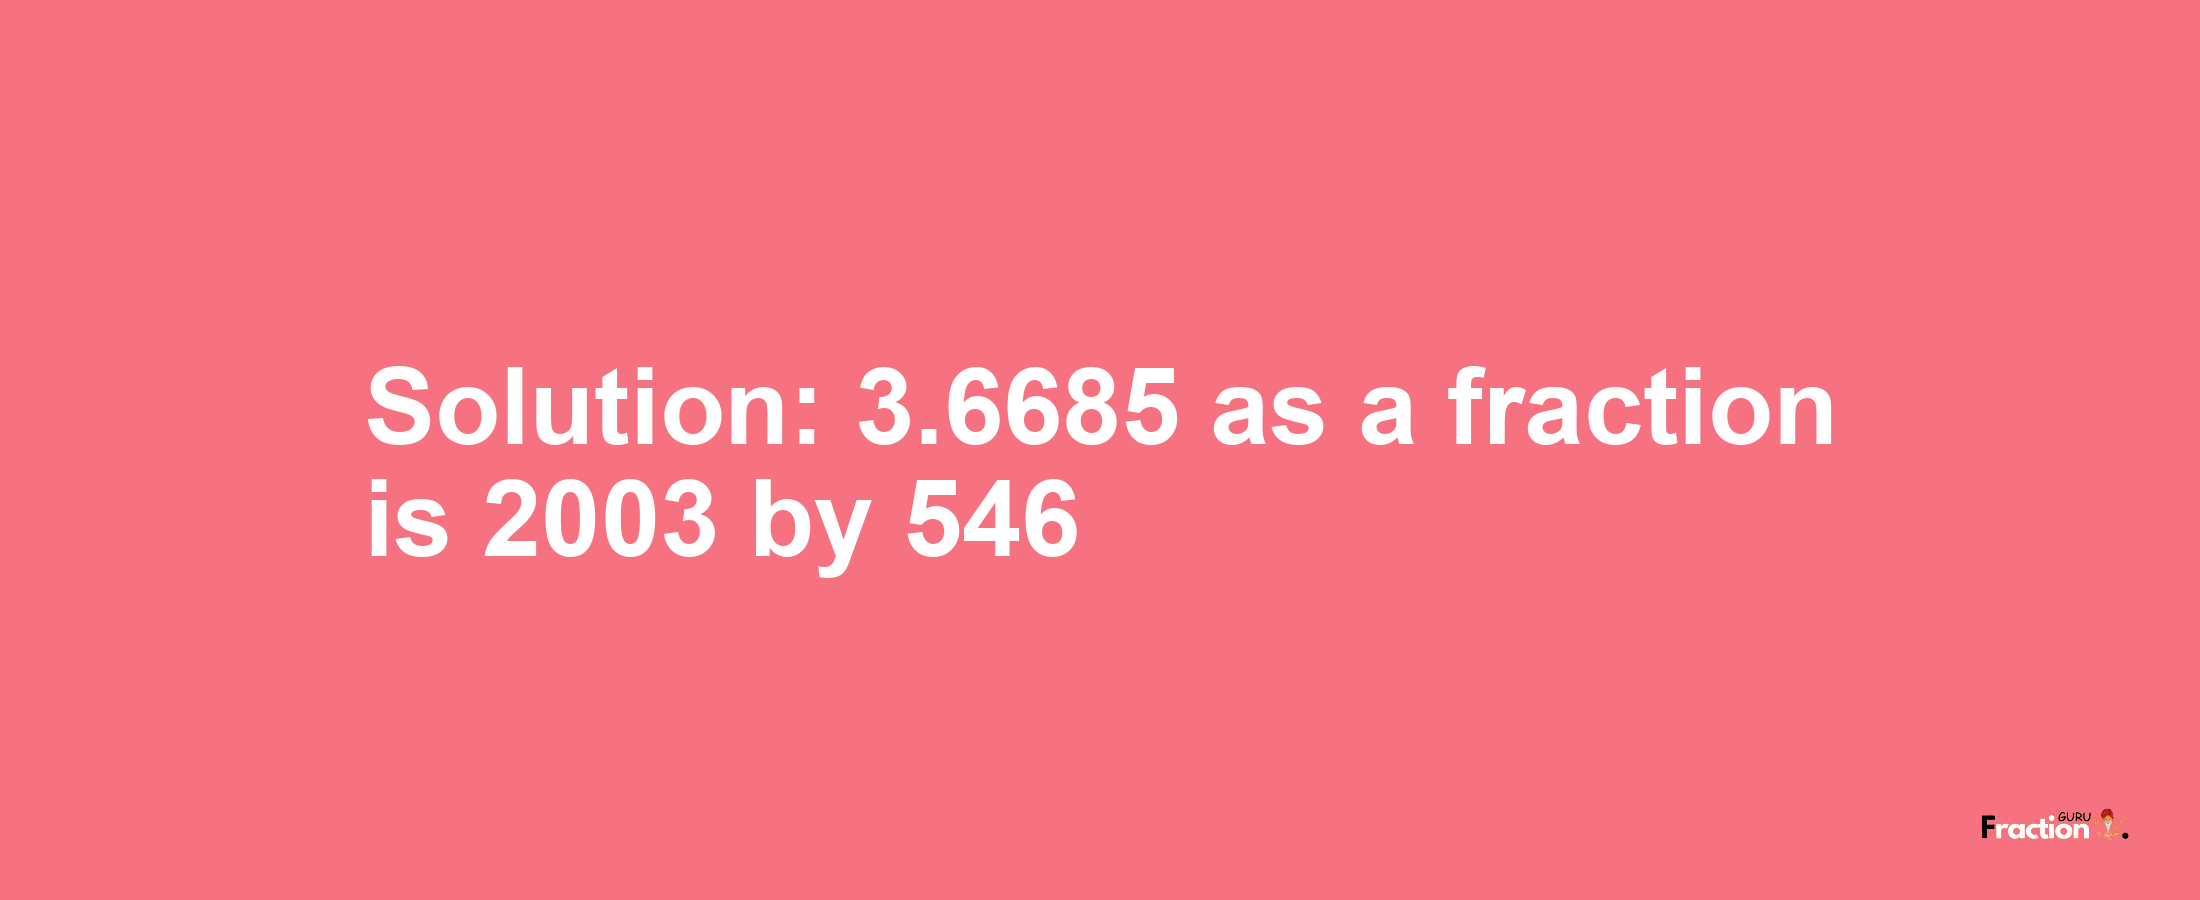 Solution:3.6685 as a fraction is 2003/546